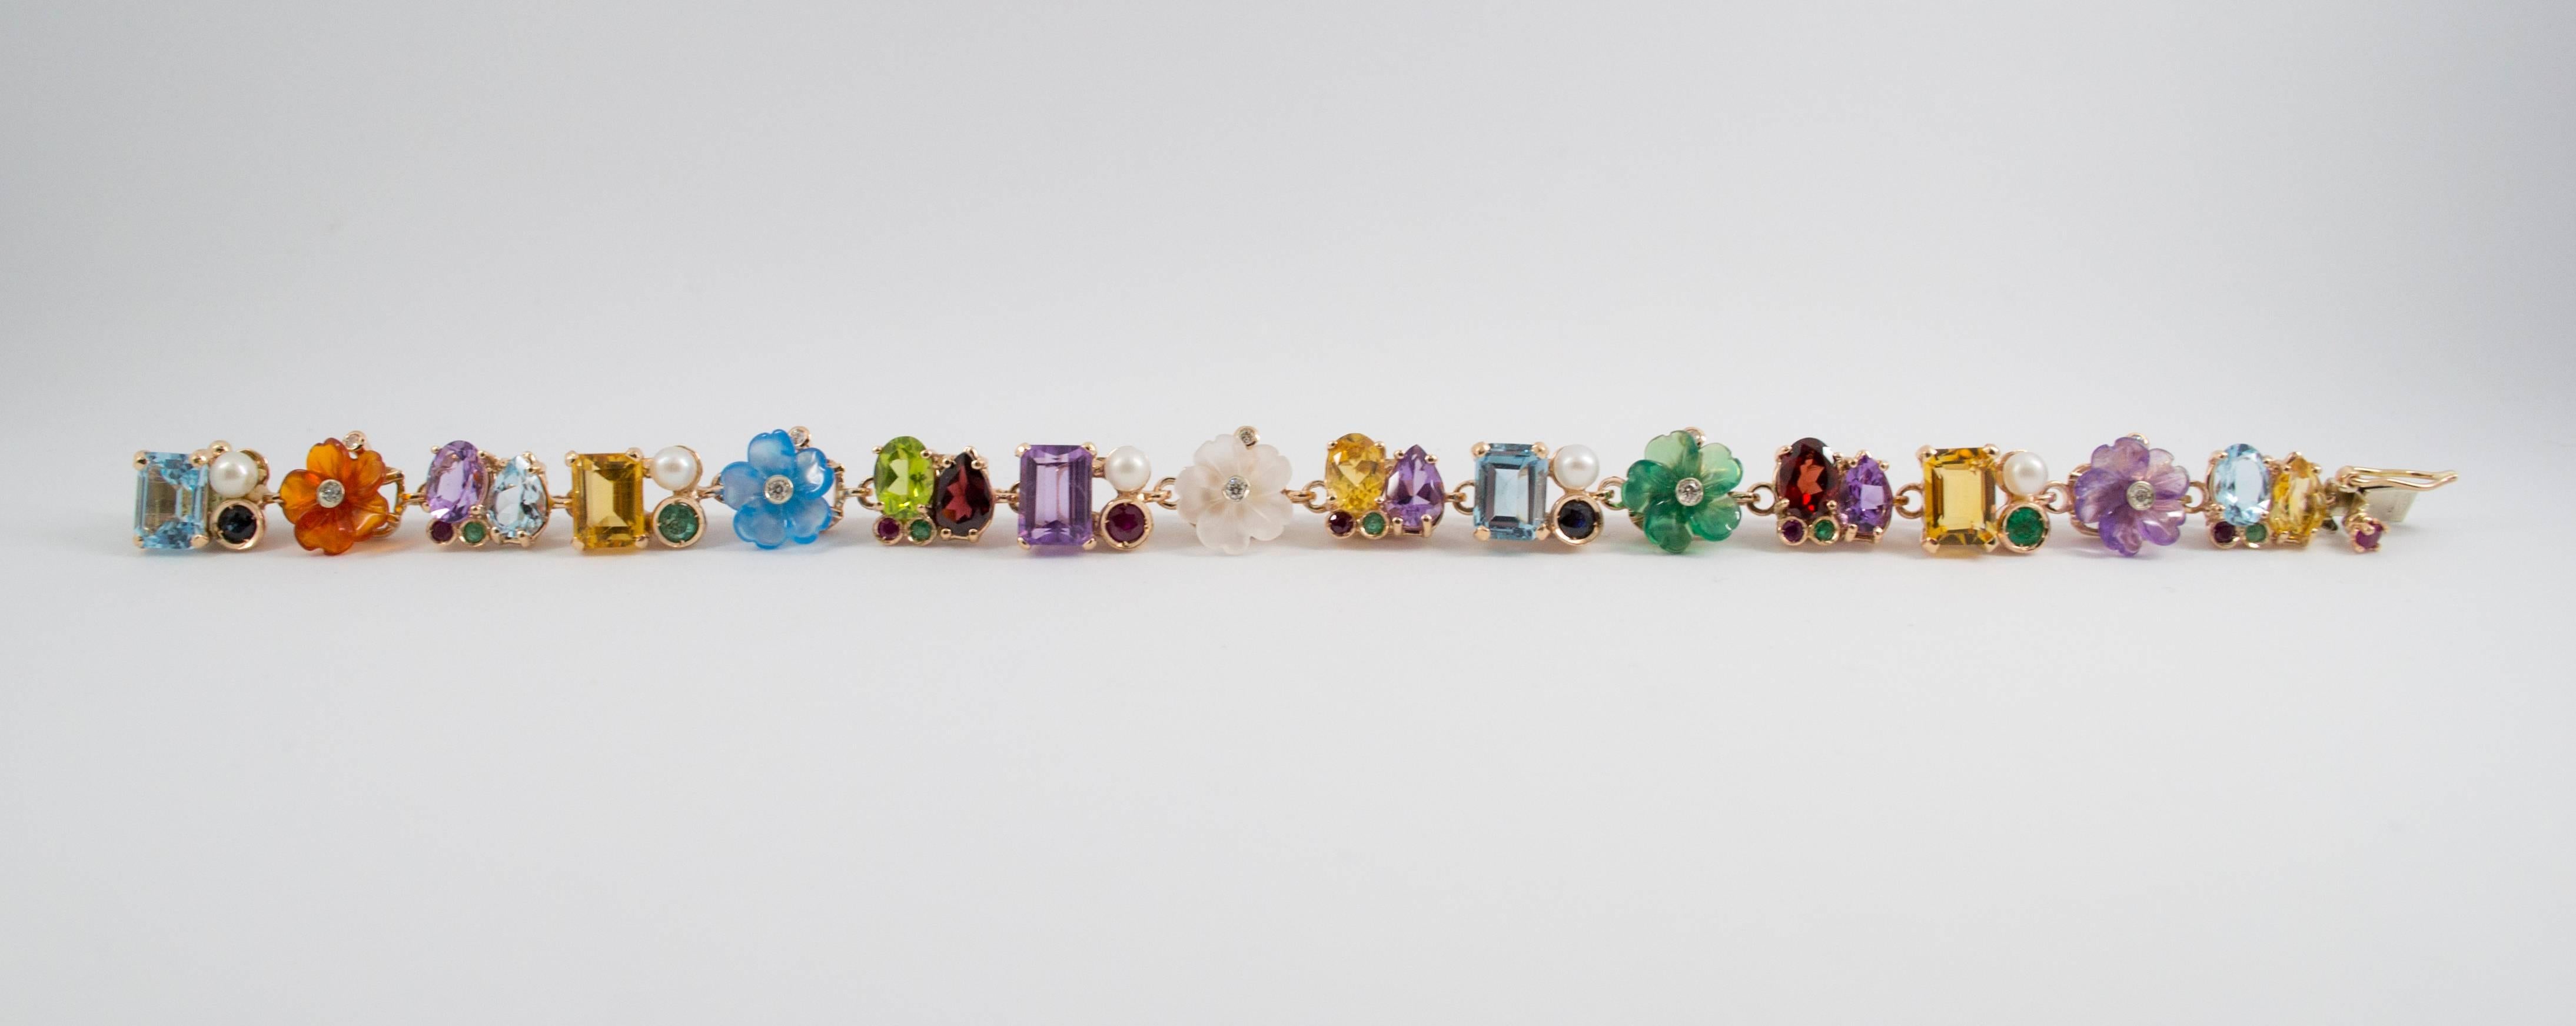 This bracelet is made of 14k Yellow Gold. 
This bracelet has 0.80 Carats of Rubies, Emeralds and Sapphires. 
This bracelet has 0.20 Carats of Diamonds. 
This bracelet has also Rock Crystal, Agate, Carnelian, Pearl, Peridot, Amethyst, Citrine, Topaz